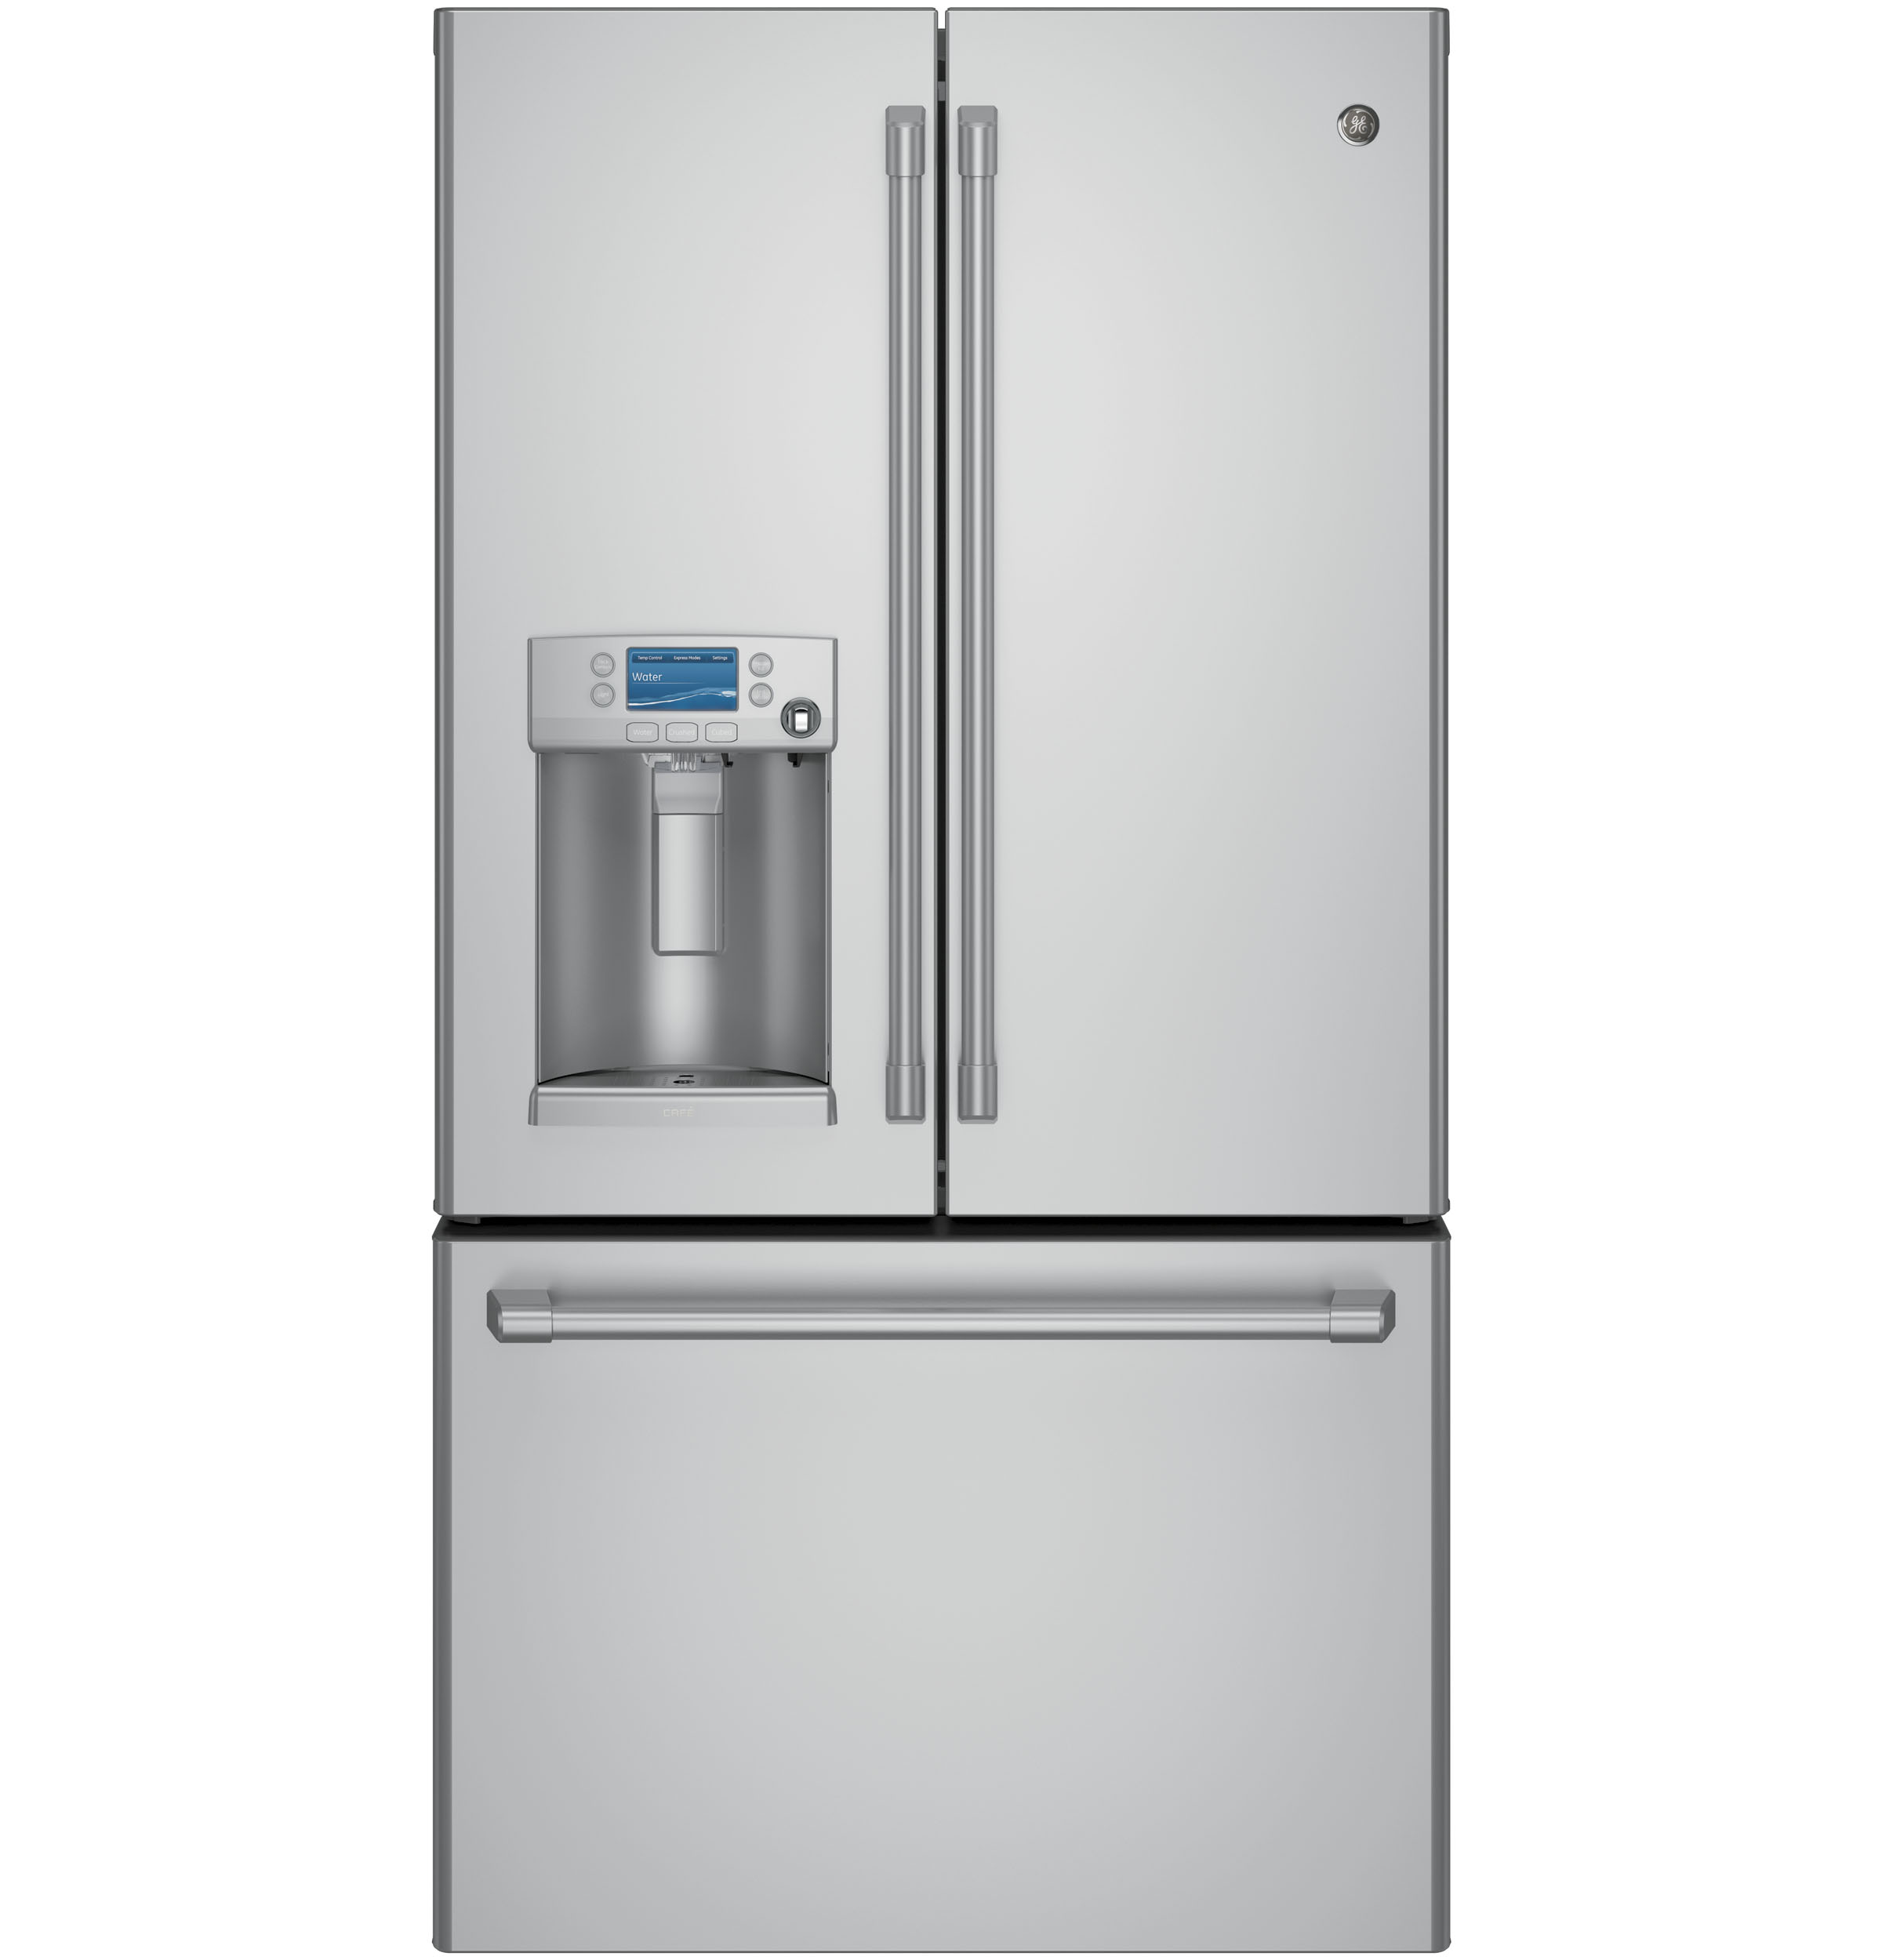 GE Café™ Series ENERGY STAR® 22.2 Cu. Ft. Counter-Depth French-Door Refrigerator with Keurig® K-Cup® Brewing System